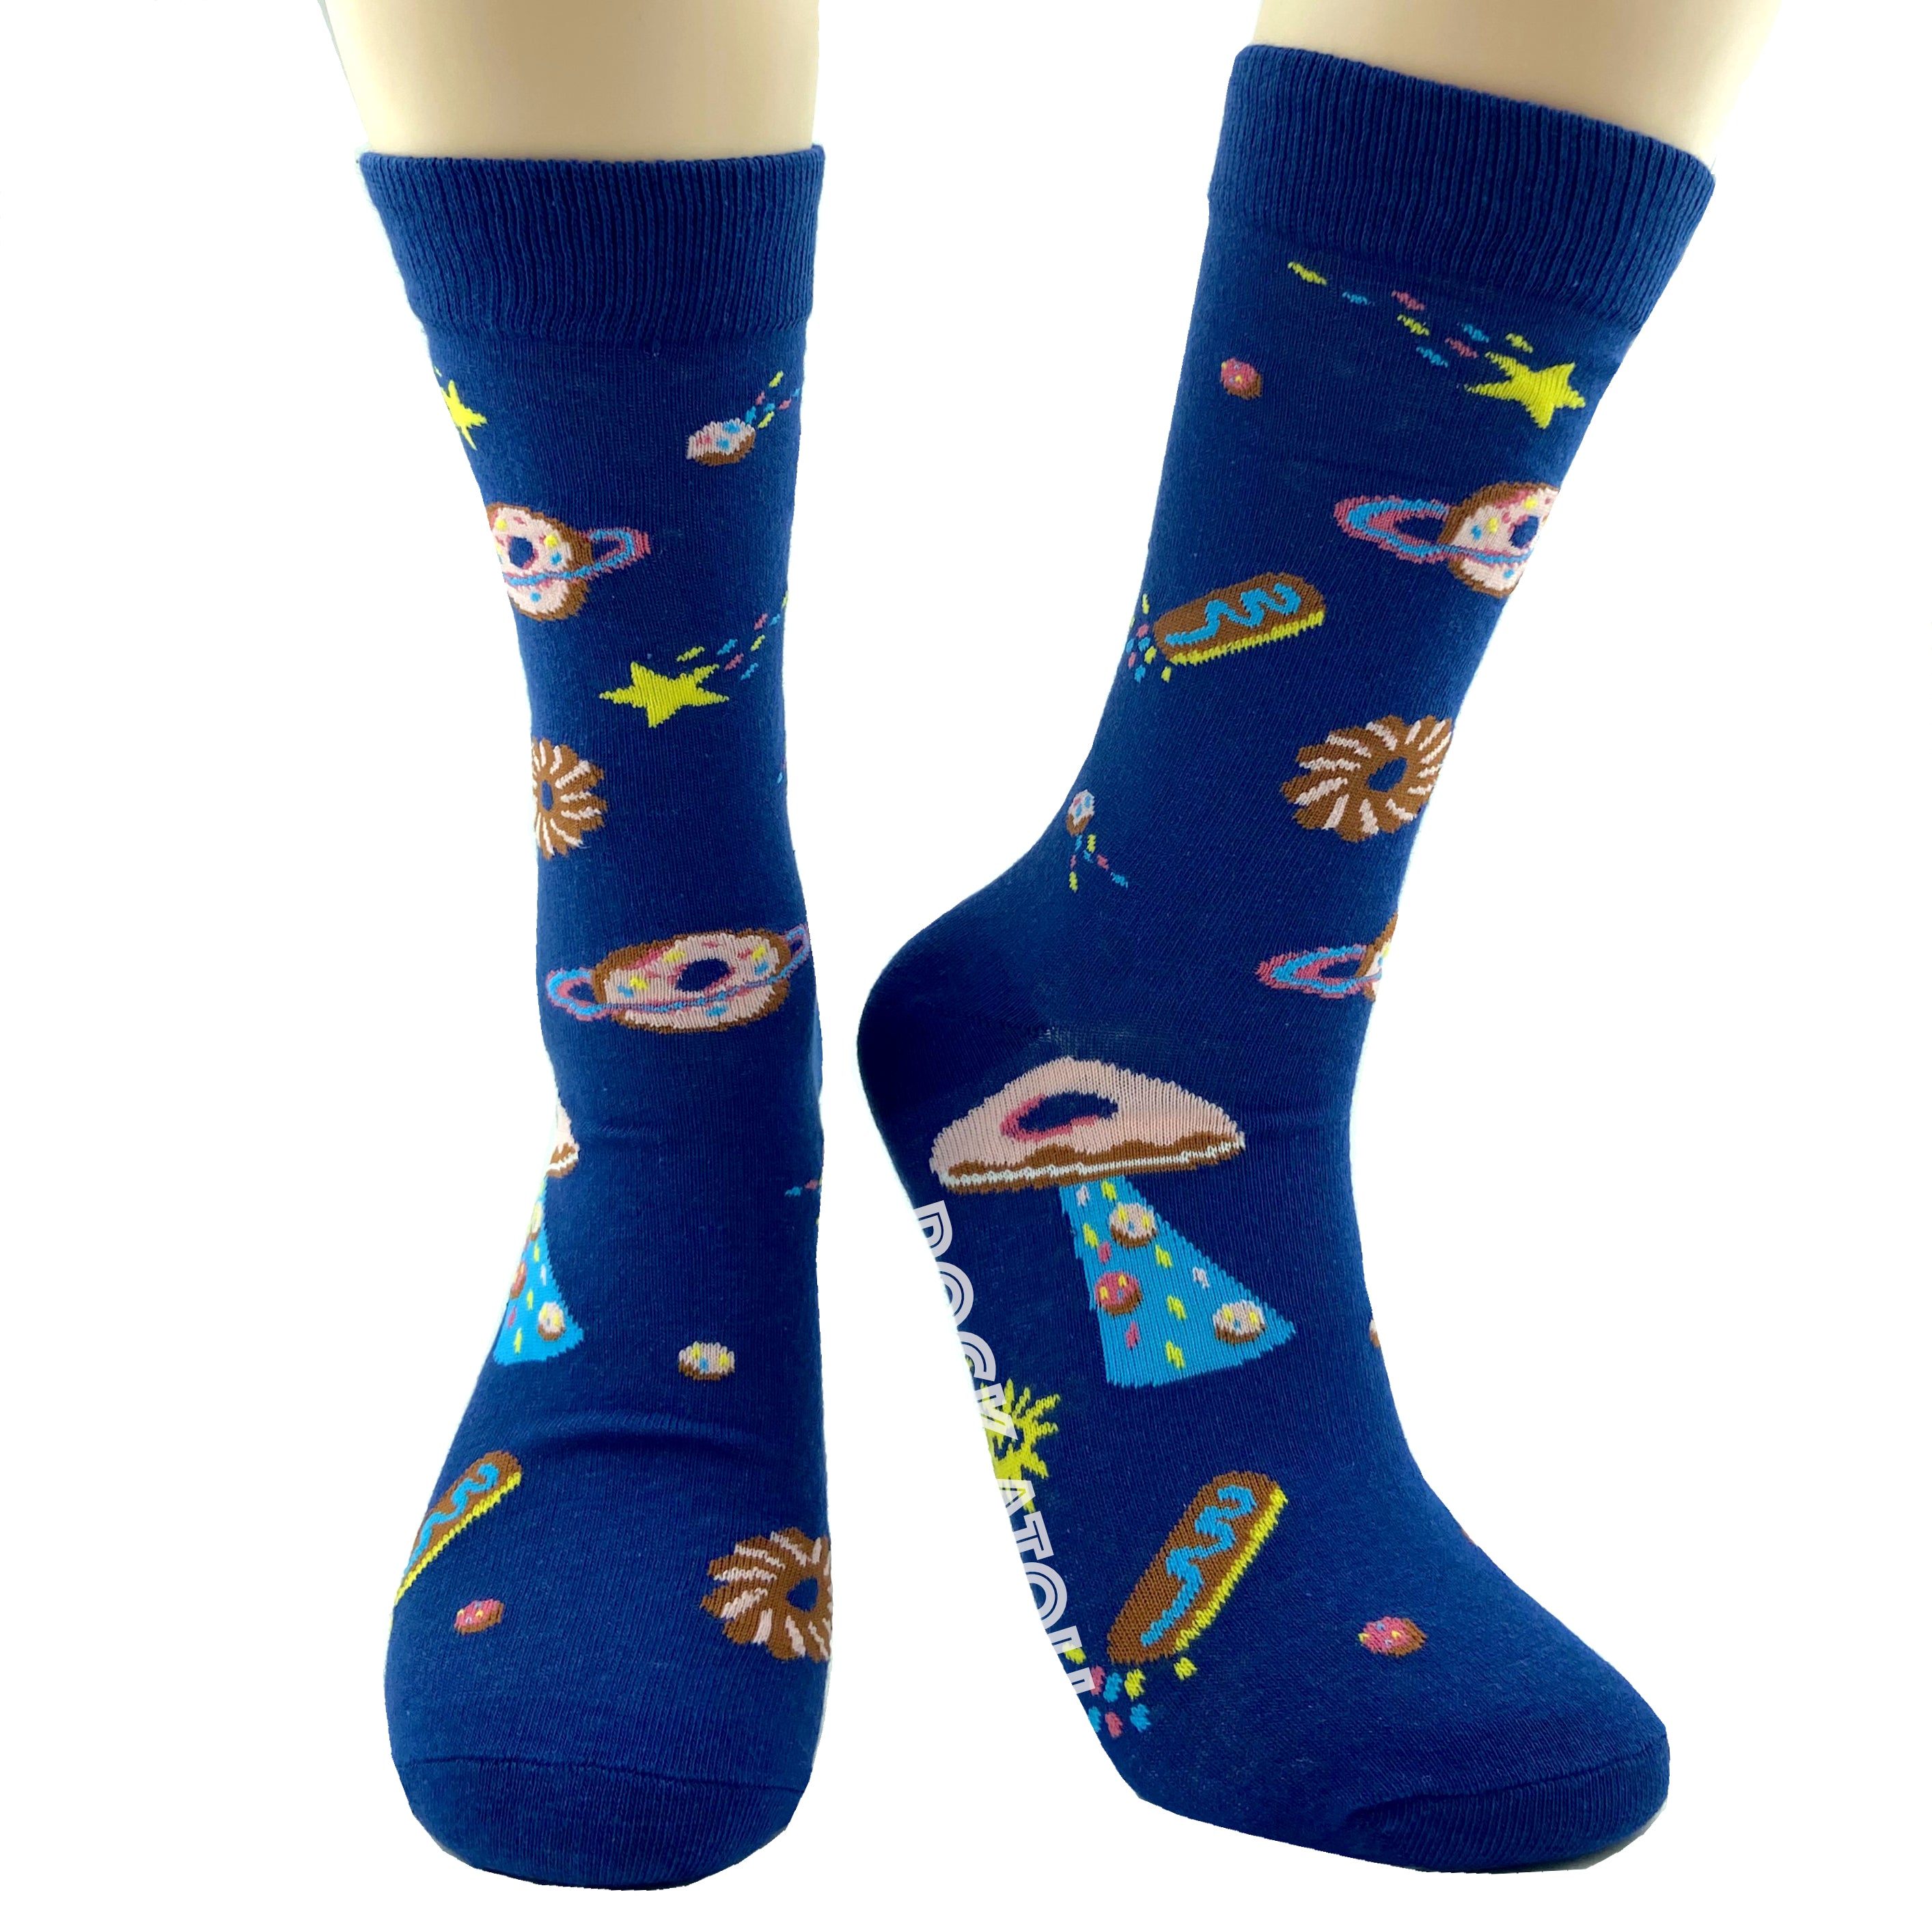 Donut Coughnuts in Outer Space Patterned Universe Themed Novelty Socks